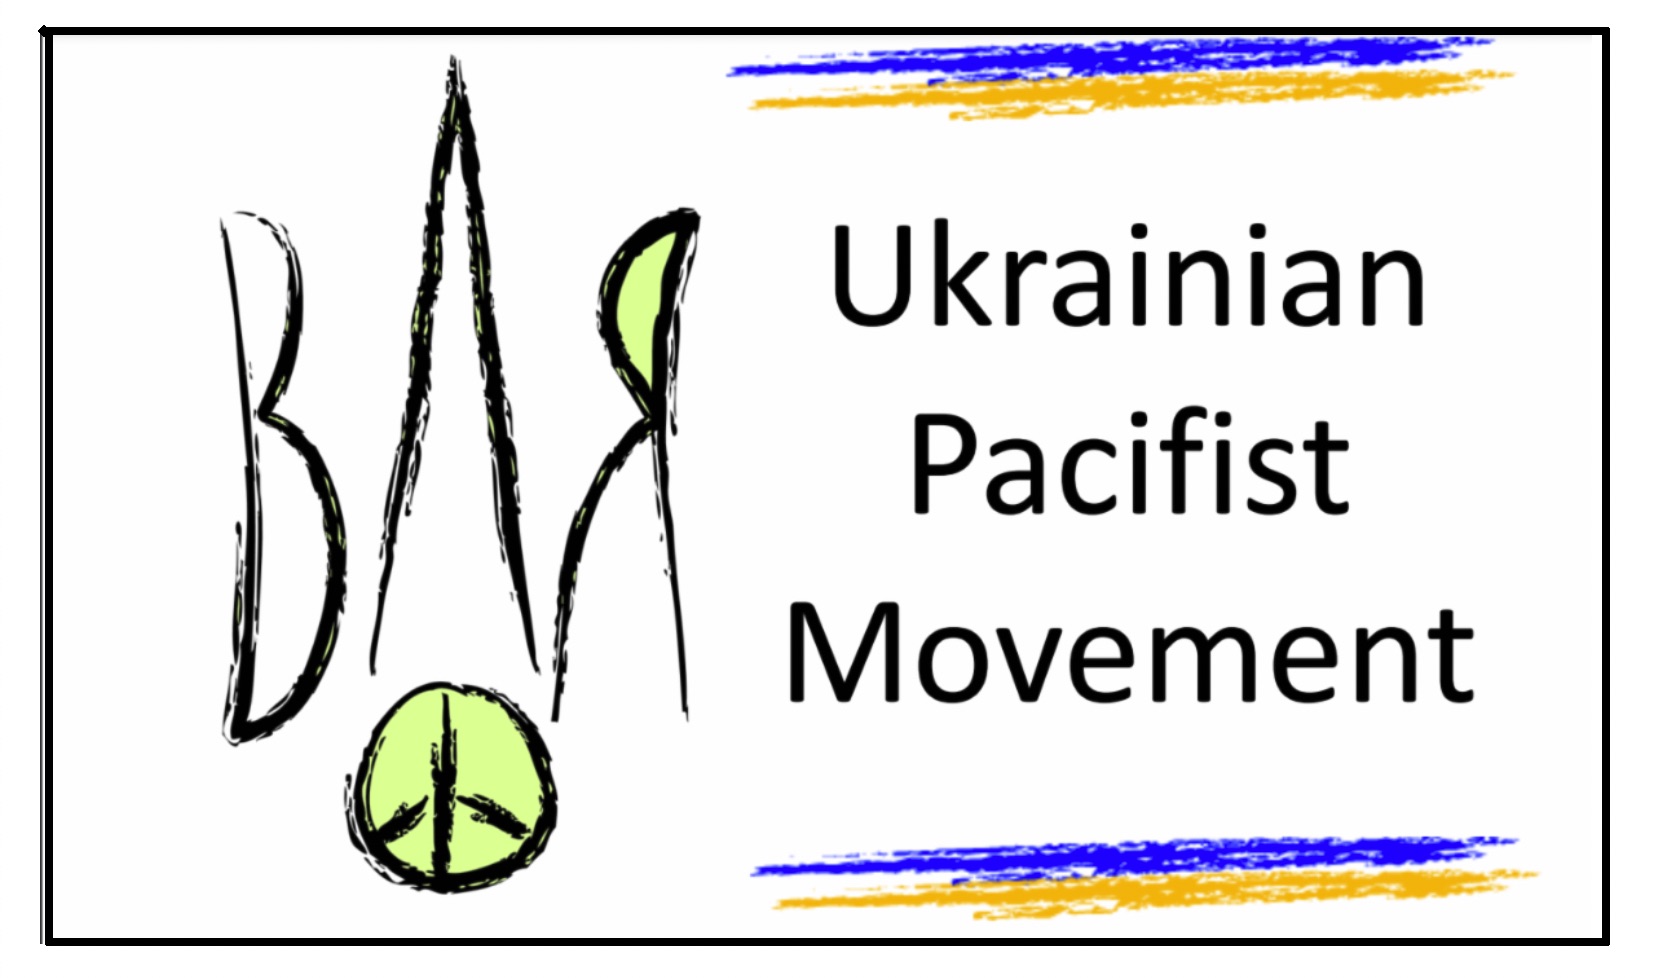 Statement of The Ukrainian Pacifist Movement Against Perpetuation of War